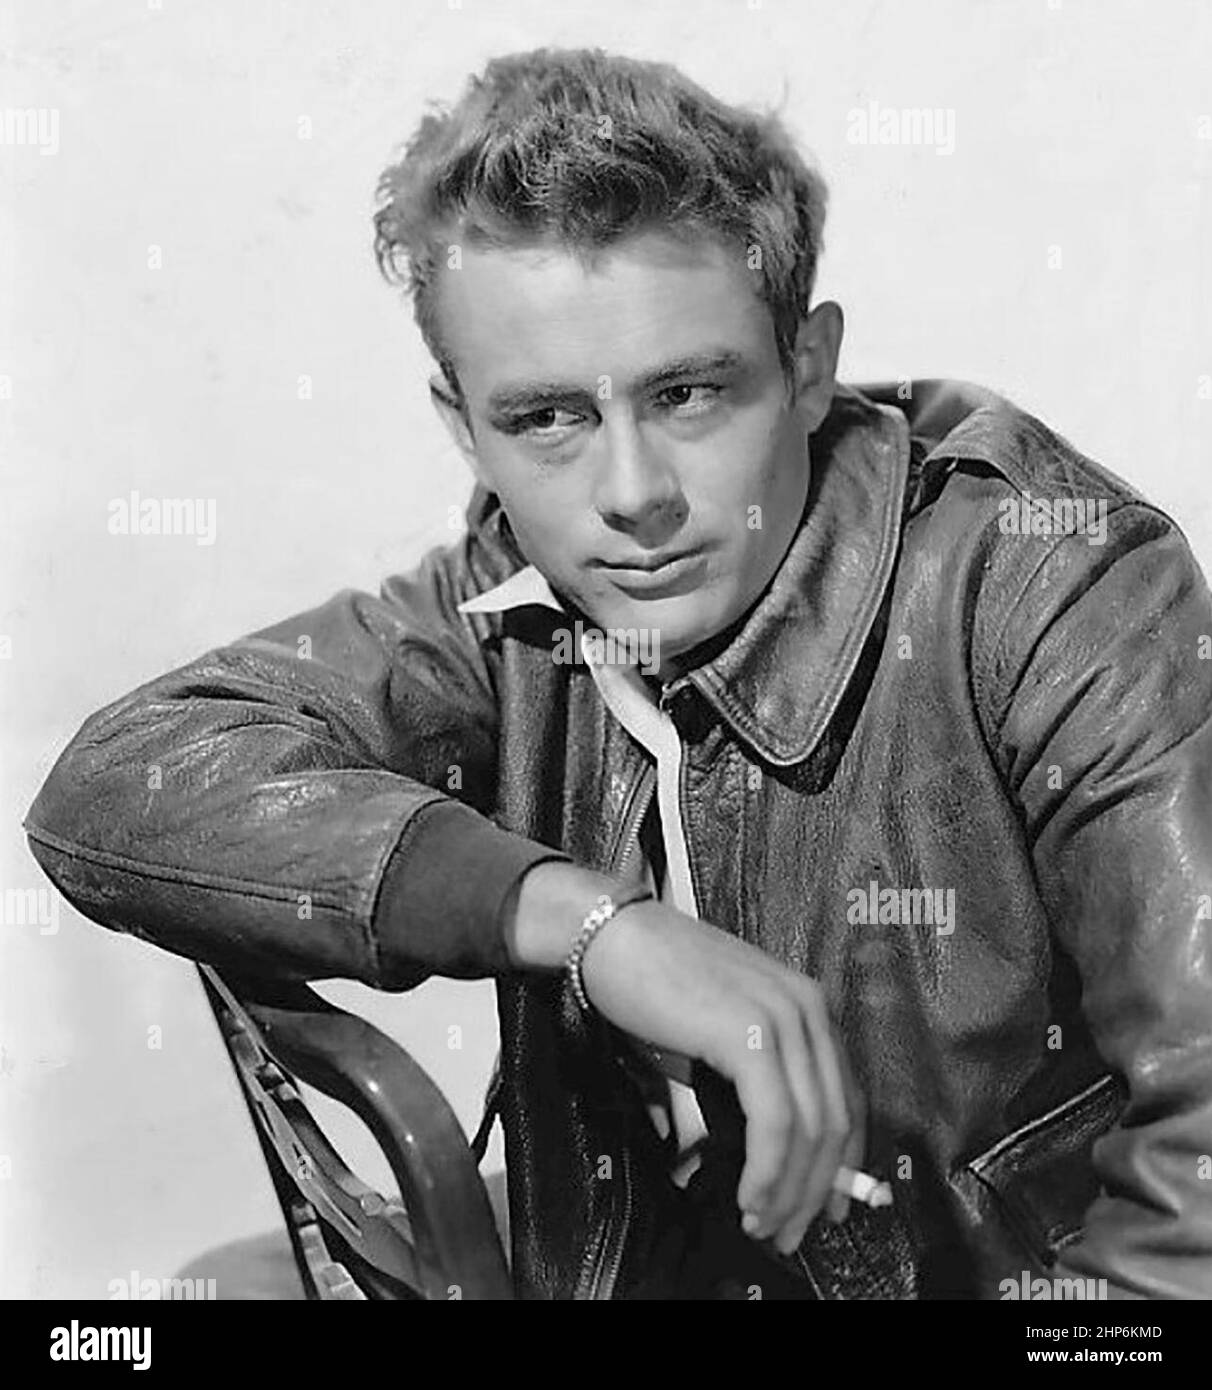 Photo of James Dean from an appearance on Schlitz Playhouse of Stars, episode 'The Unlighted Road', May 6, 1955 Stock Photo